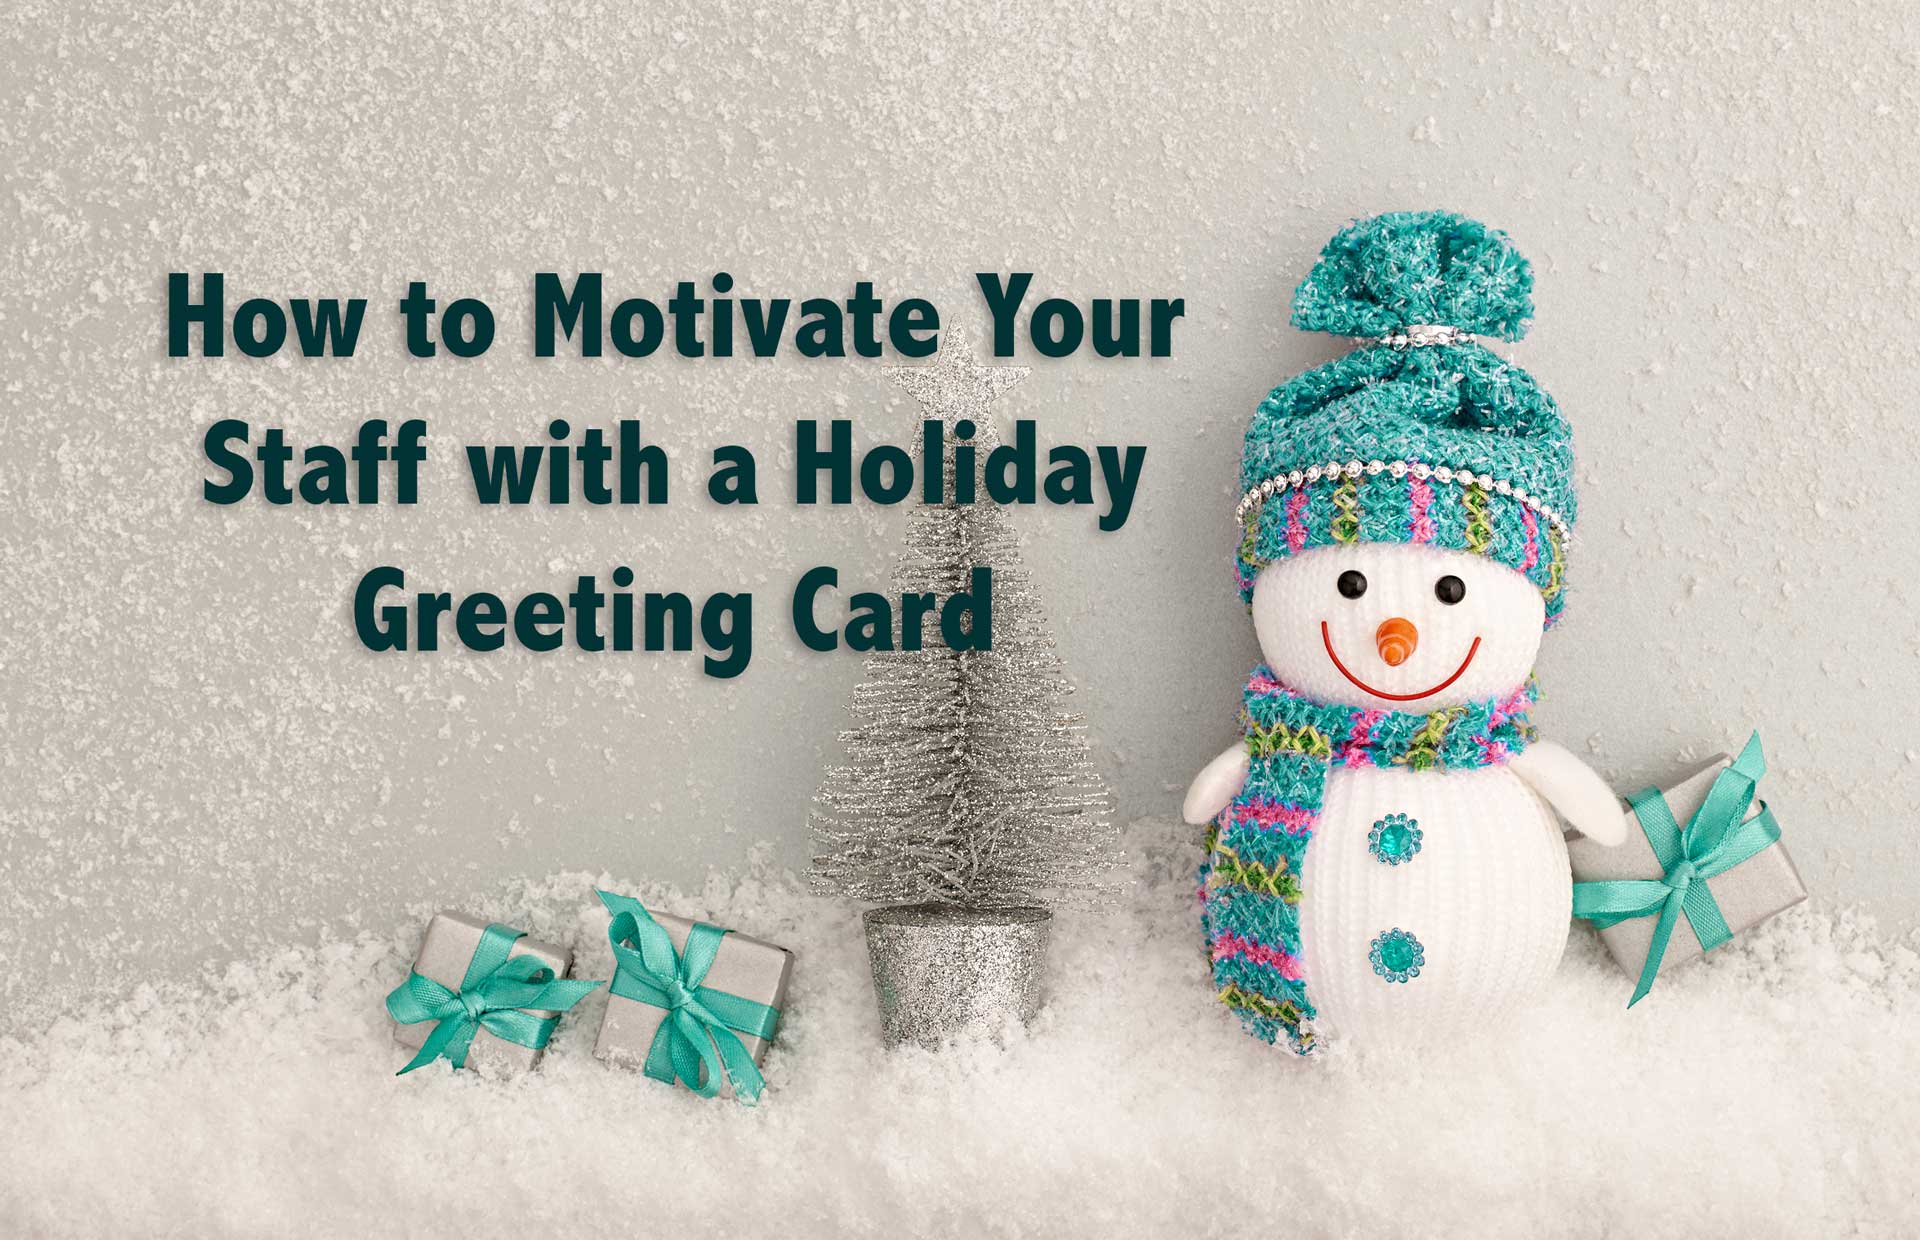 How to Use a Holiday Card to Inspire Your Staff - LEADx